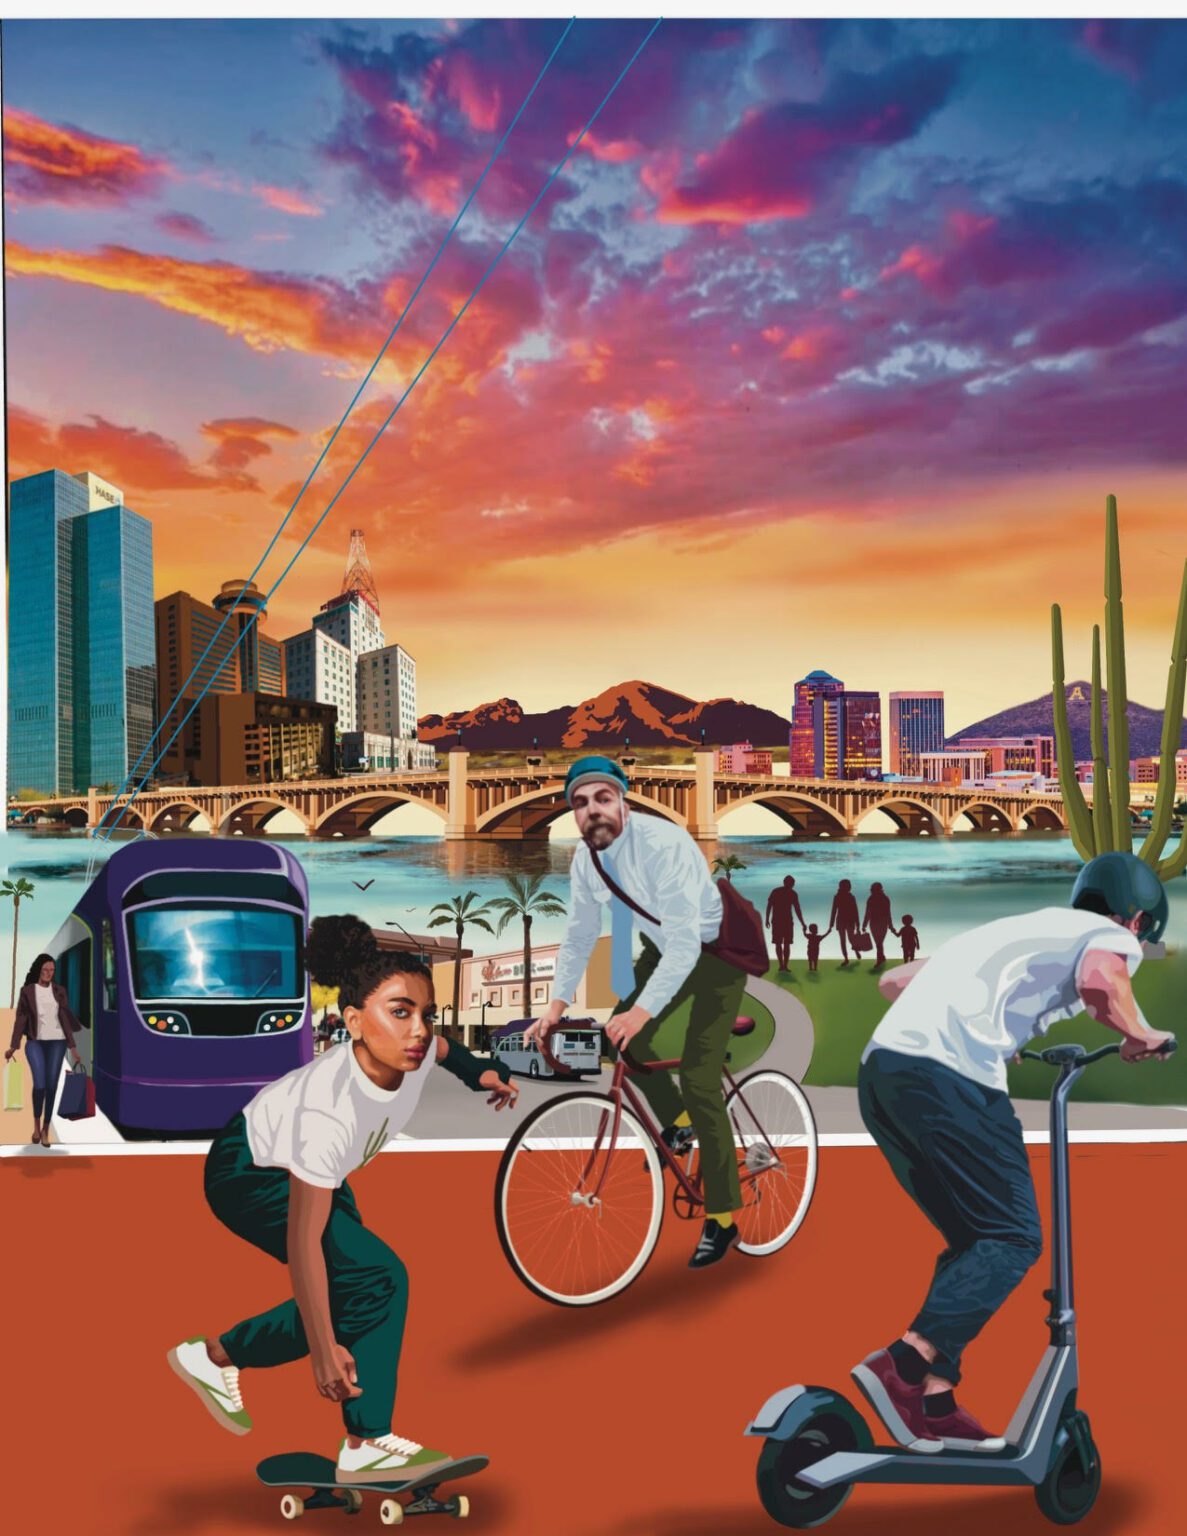 Artwork for 2023 Mpact Transit + Community conference in Phoenix, by Tato Caraveo